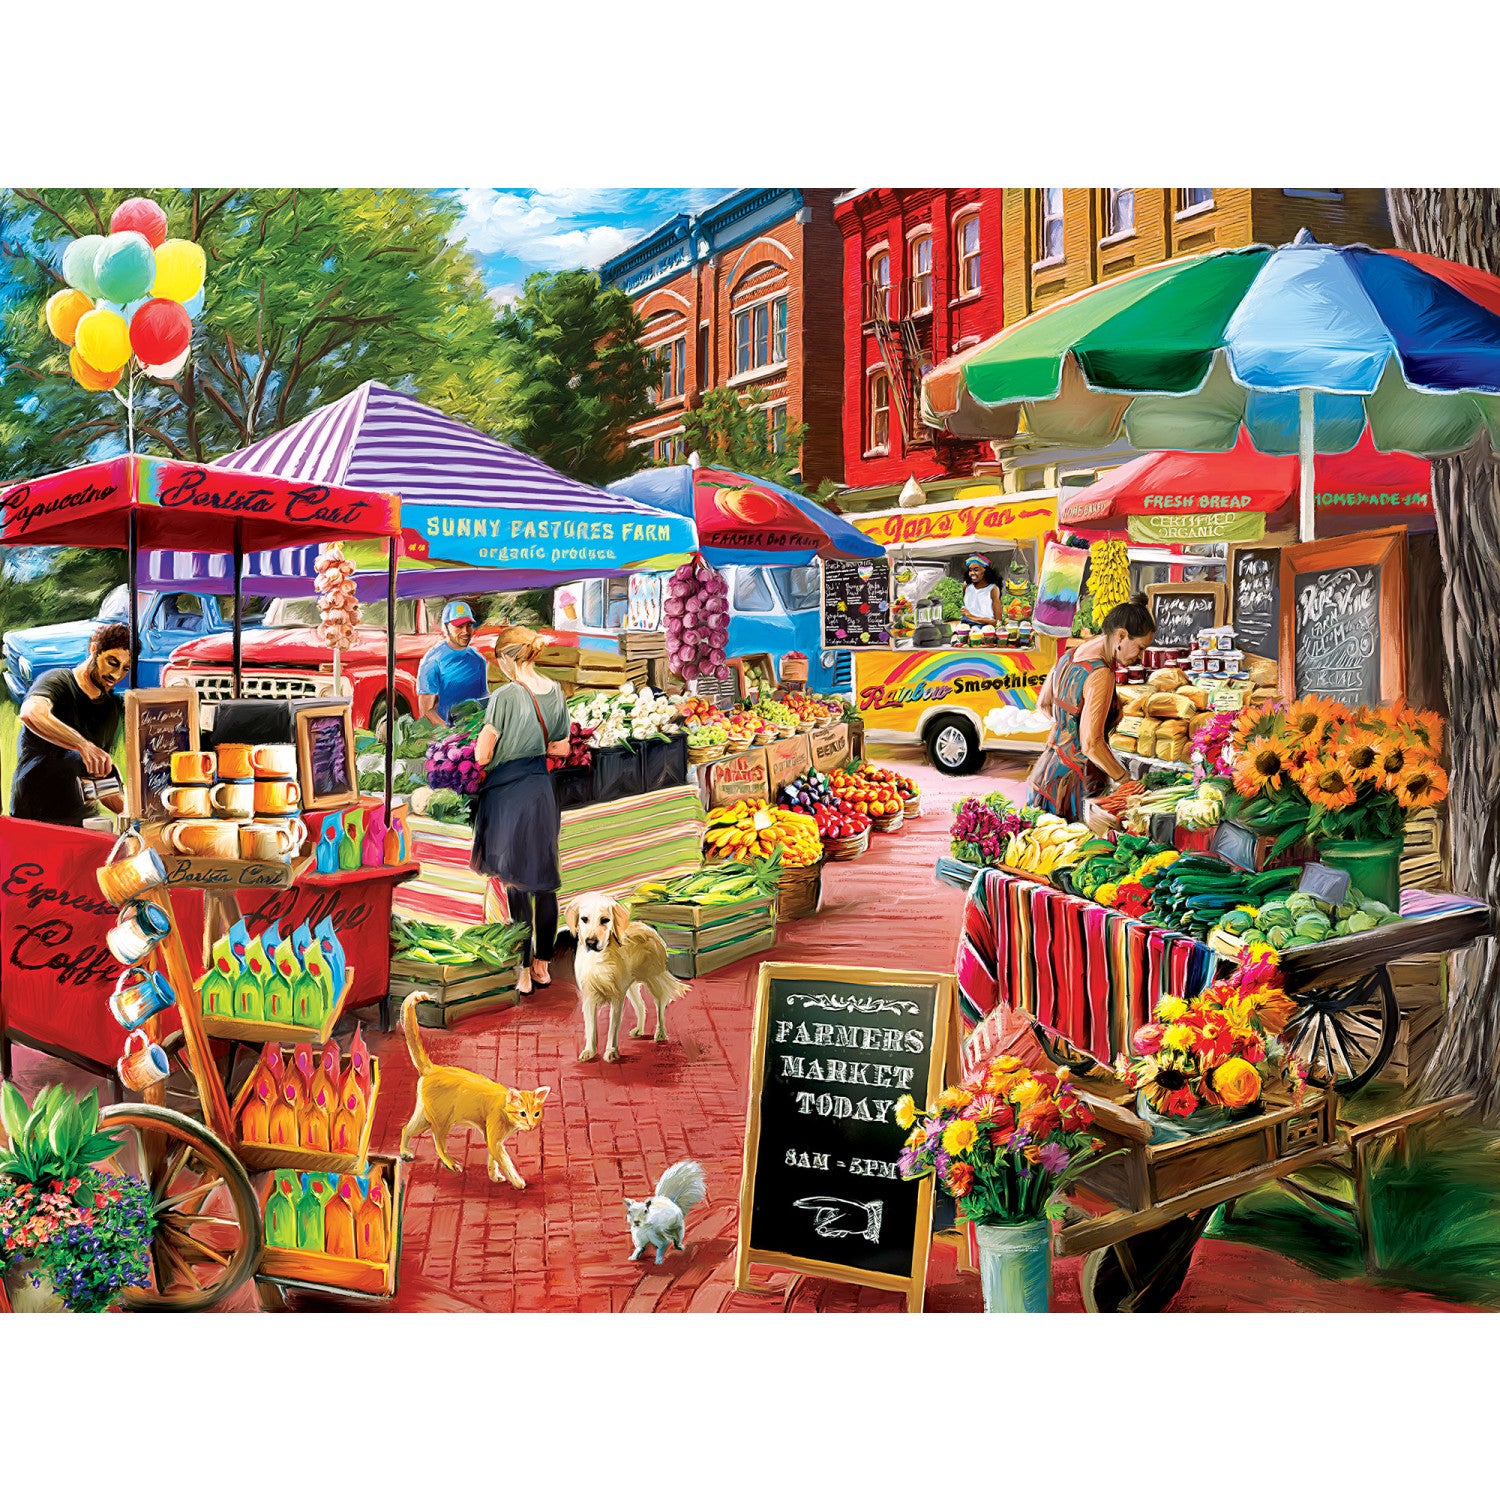 Farmer's Market - Town Square Booths 750 Piece Puzzle